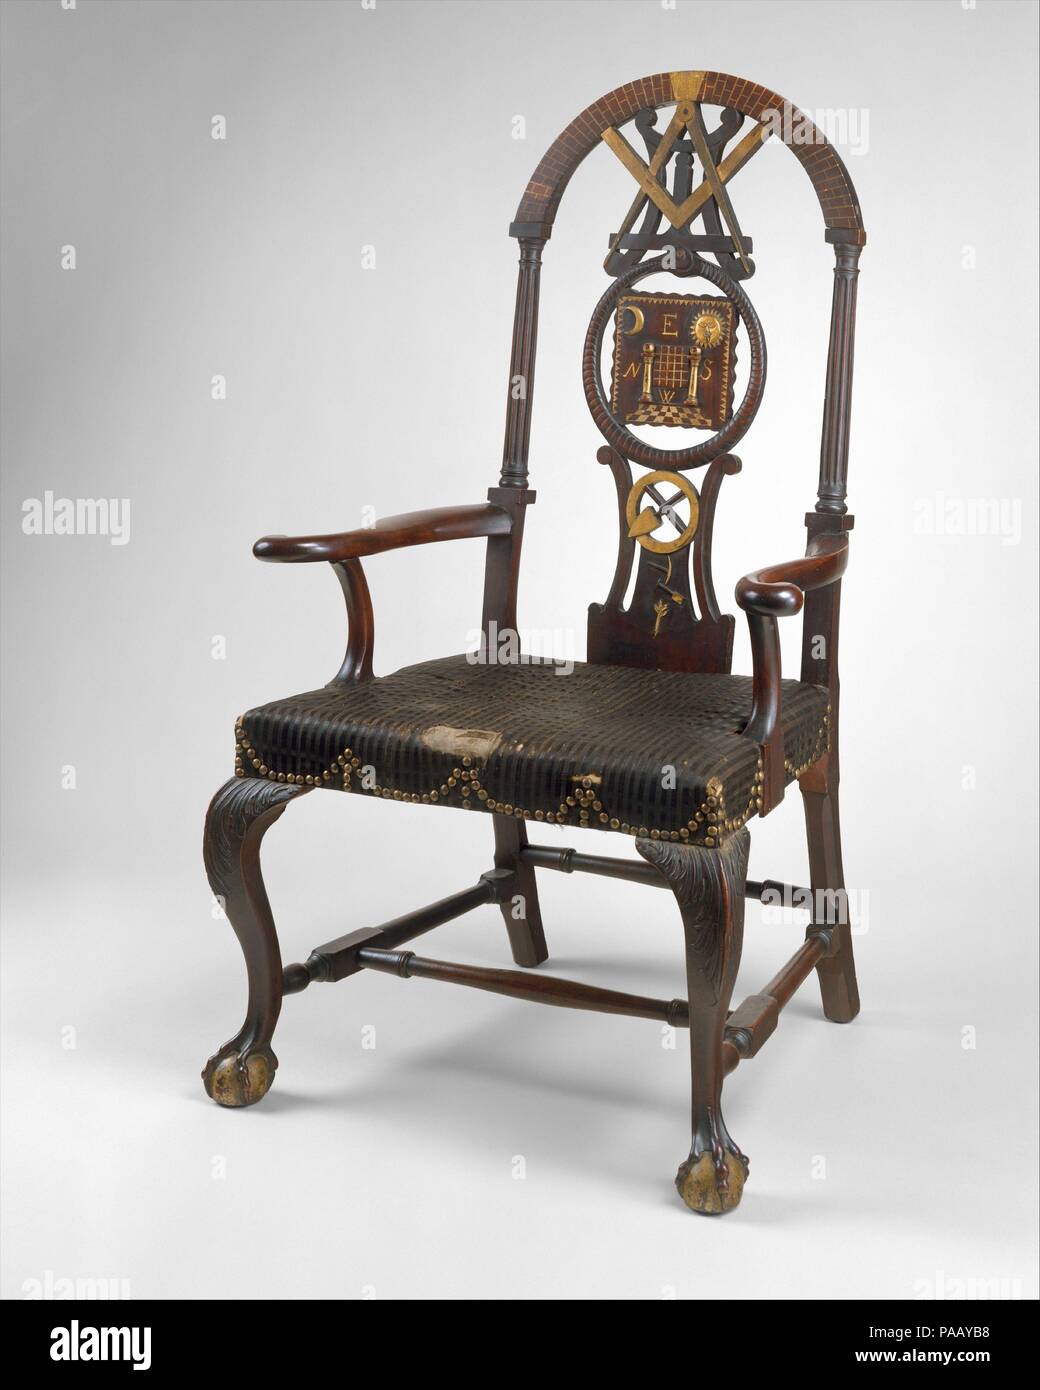 Masonic Armchair. Culture: American. Dimensions: 50 1/2 x 25 5/8 x 24 3/4 in. (128.3 x 65.1 x 62.9 cm). Date: 1775-90.  The seat and legs of this example are typical of the best Boston Rococo chairs, but the back is unusual. It is made up of Masonic symbols: fluted columns (referring to King Solomon's temple), a rusticated arch (arch of heaven), a compass and square (faith and reason), a mason's level (equality), a serpent swallowing its tail (rebirth), and a trowel (cement of brotherly love). The chair was probably made for the senior warden of an as-yet-unidentified Massachusetts lodge. Muse Stock Photo